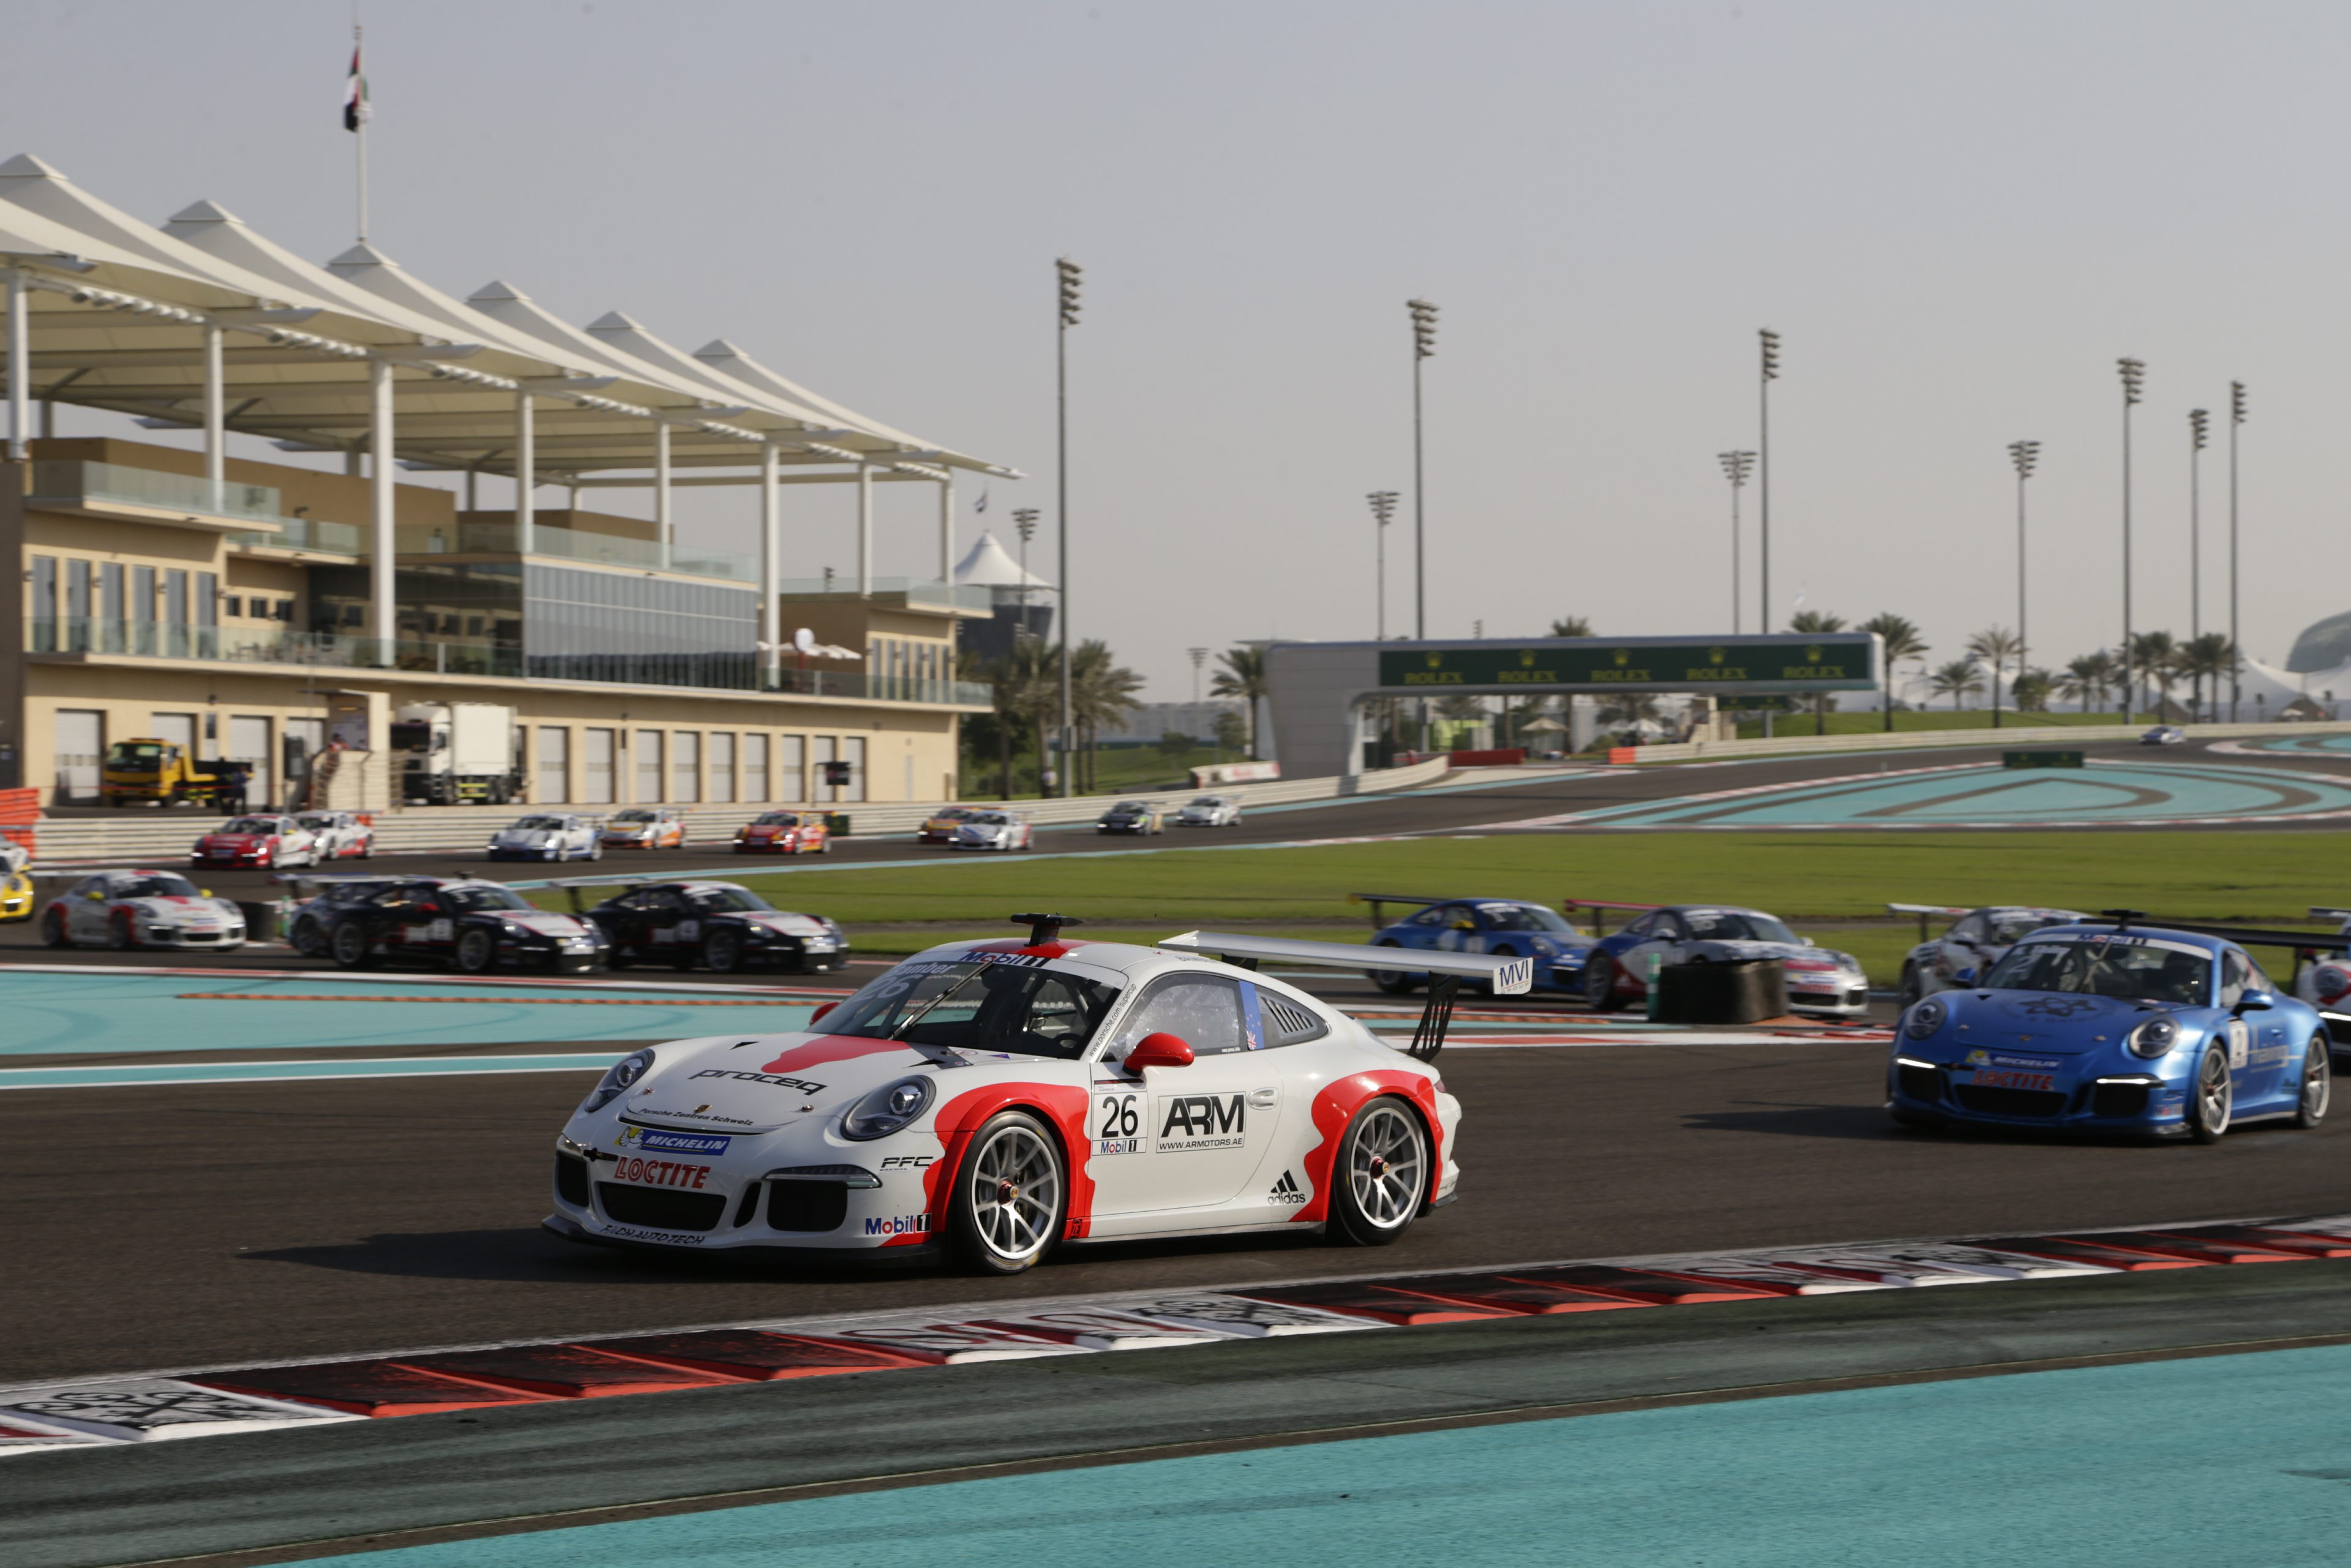 BATTLE OF THE WEEK: Earl Bamber battles for the lead in Abu Dhabi